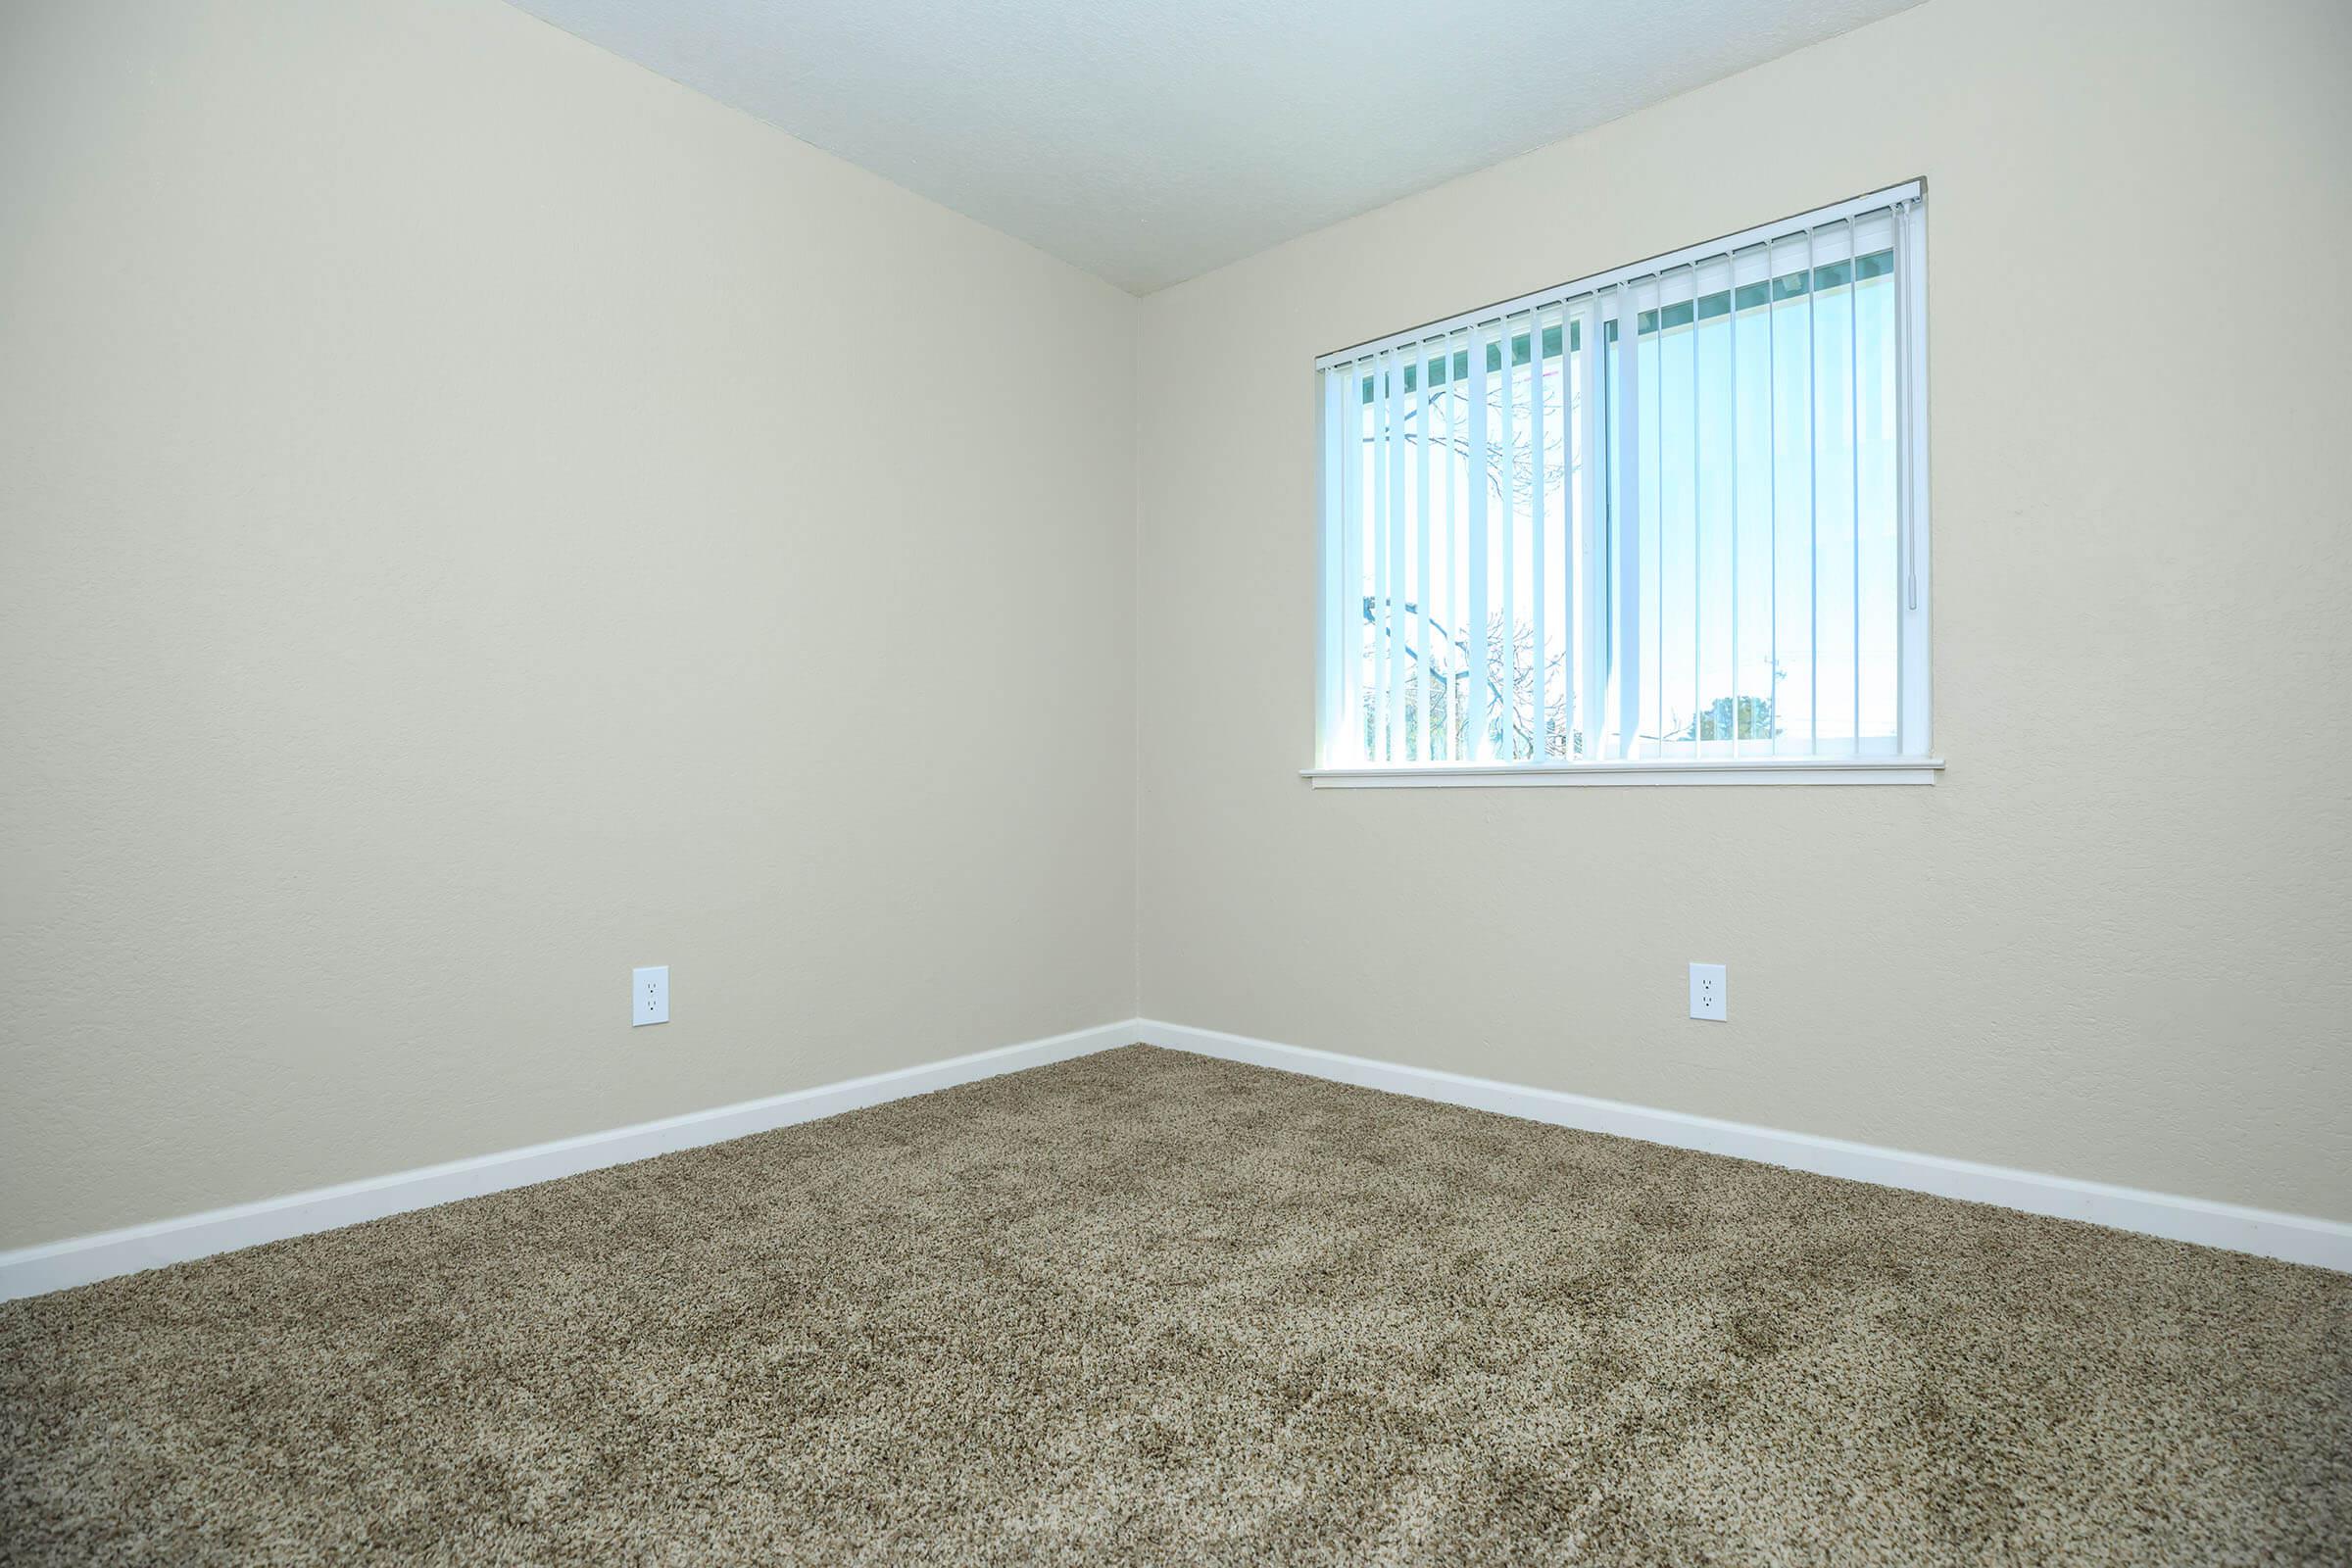 Vacant carpeted bedroom with a window